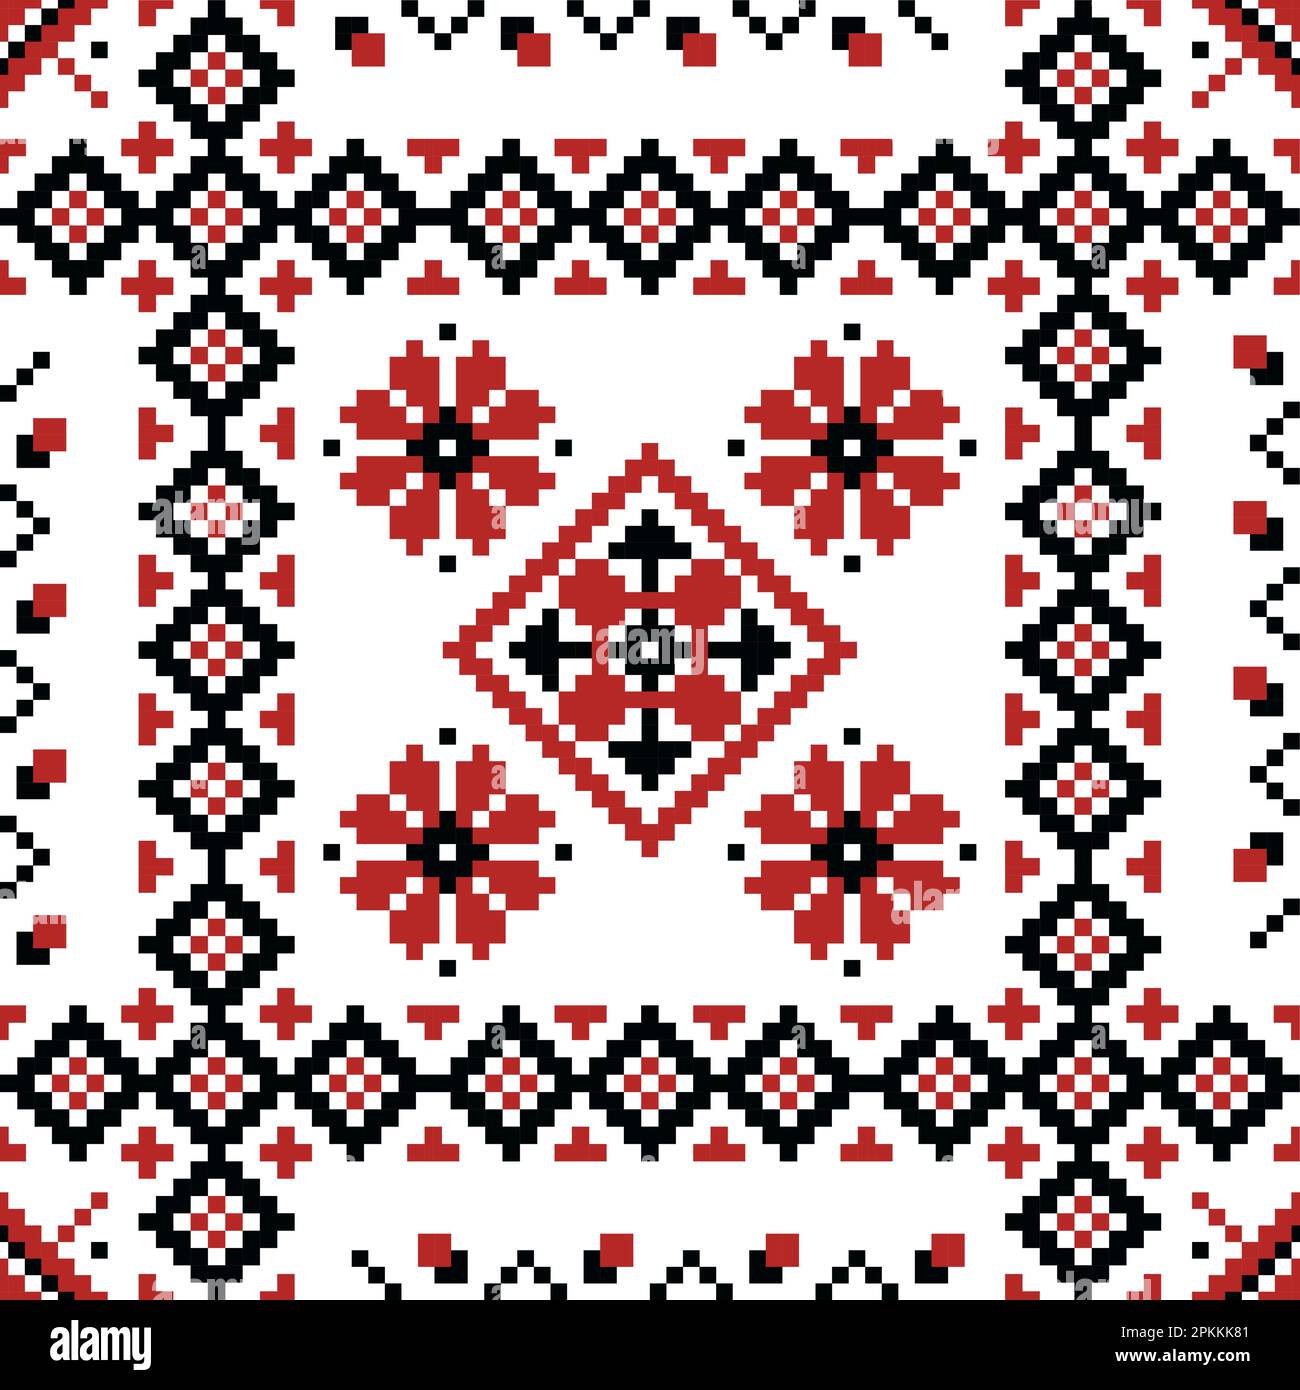 Ukrainian embroidery pattern. Seamless print of slavic traditional border with ethnic abstract figures. Vector Ukrainian fabric motif texture. Ornamental needlework design with floral motif Stock Vector